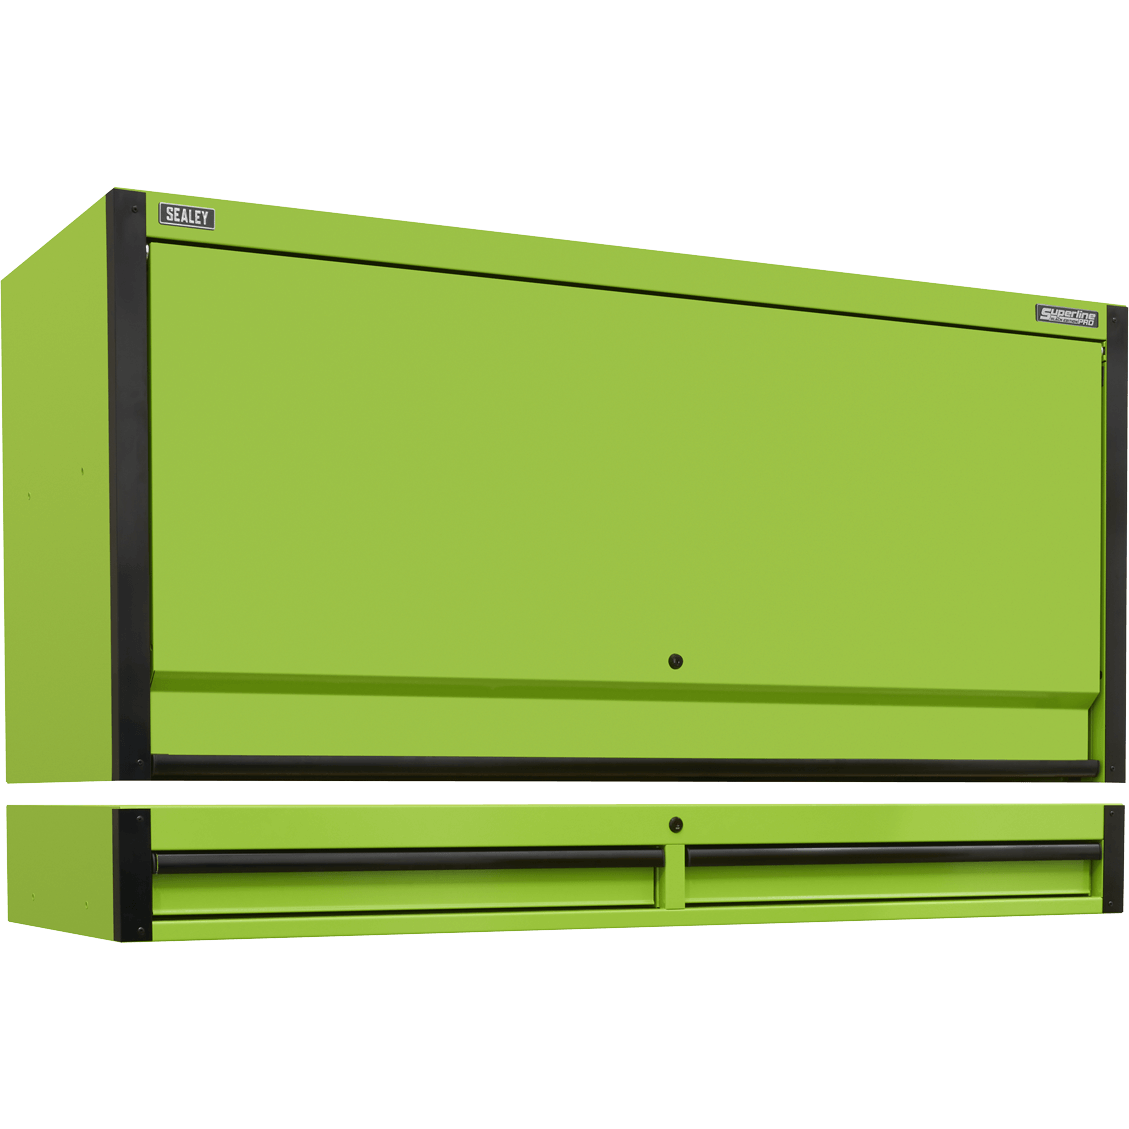 Sealey Superline Pro Top Hutch Tool Chest and 2 Drawer Riser Green